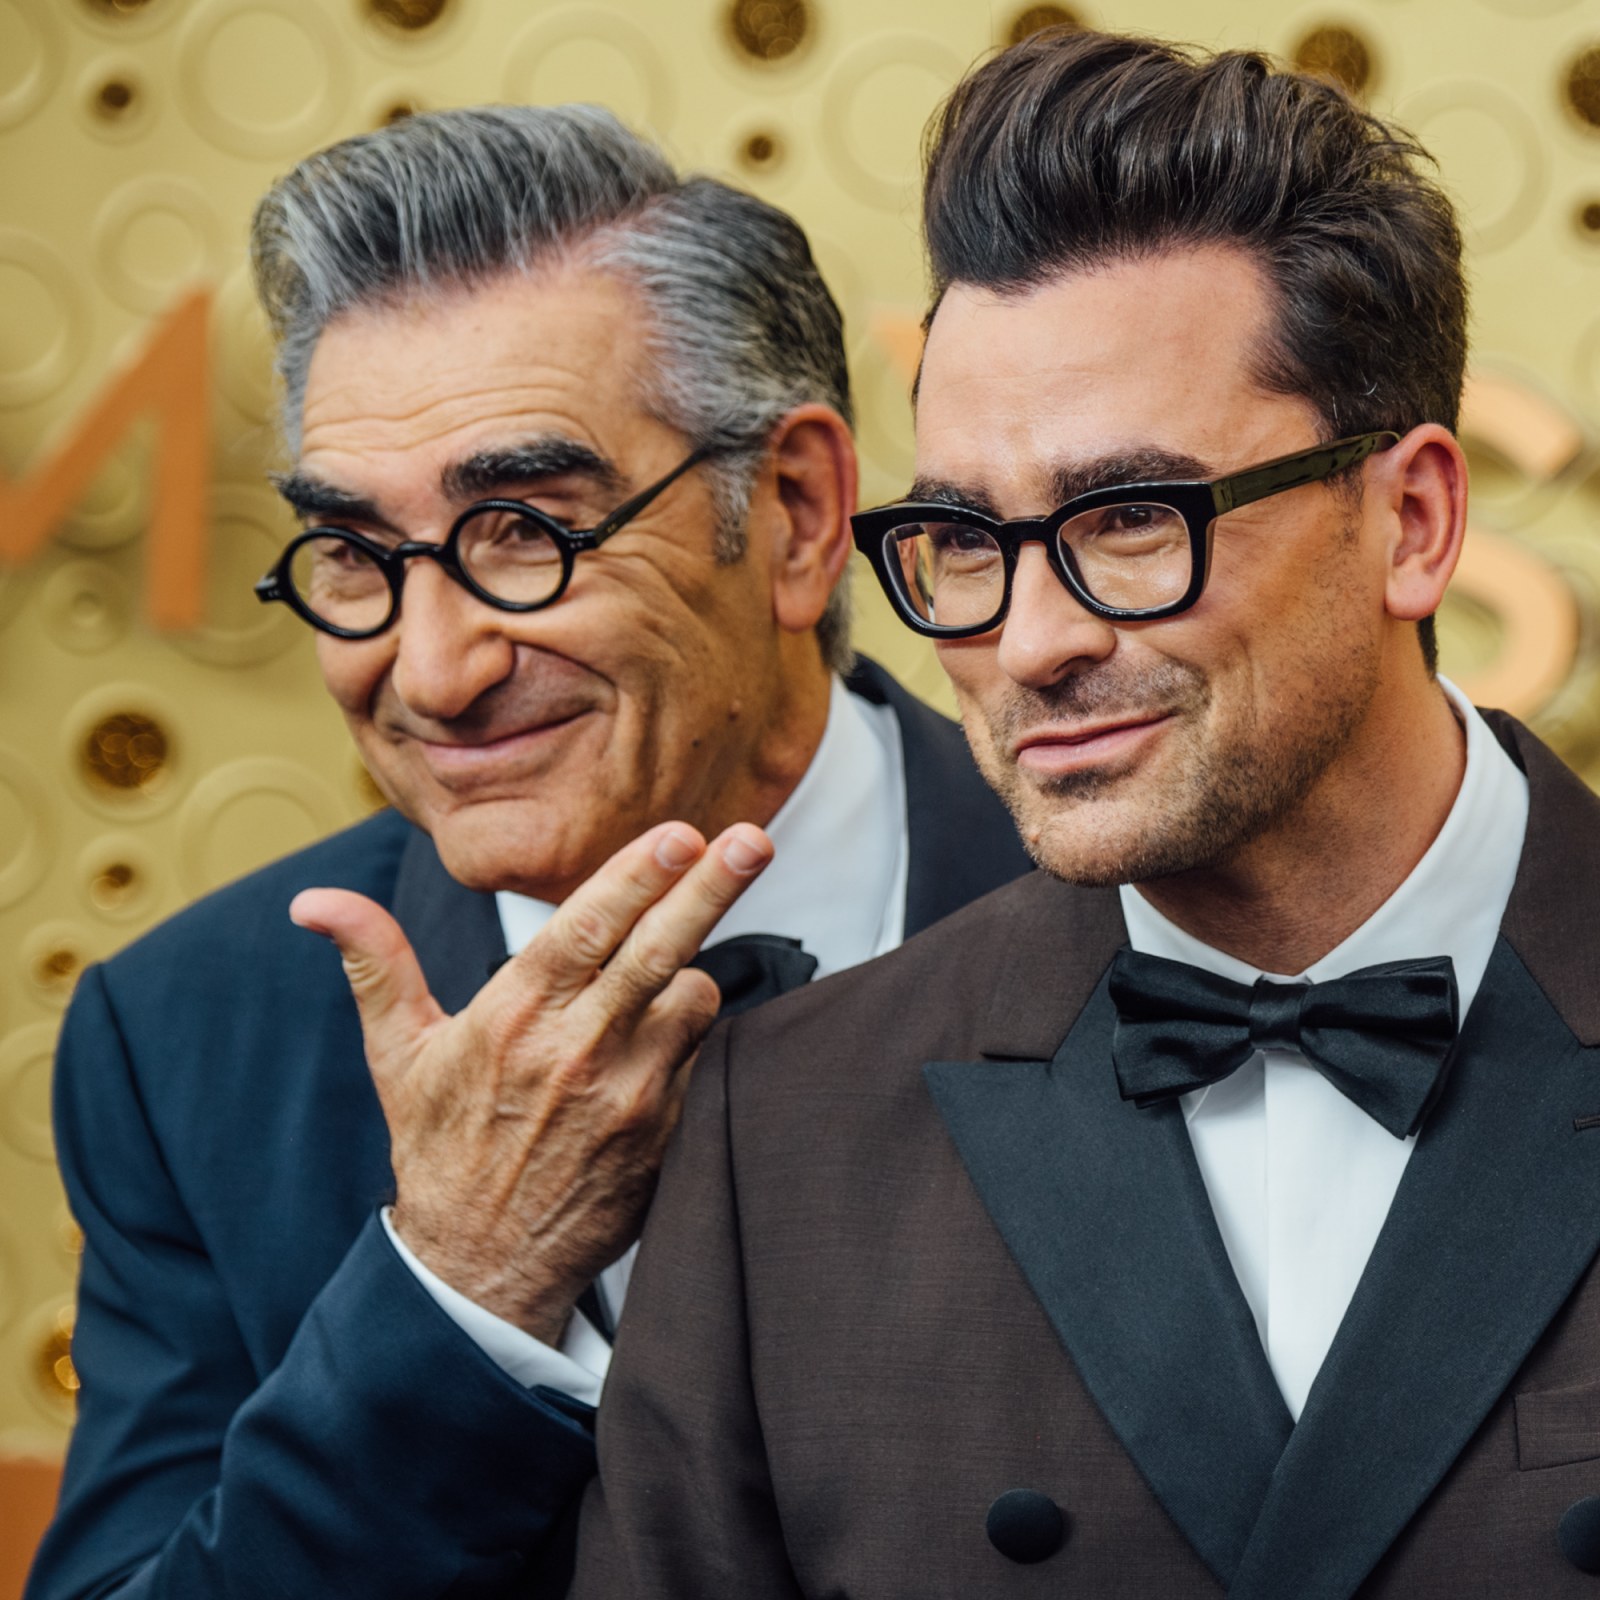 'Schitt's Creek' Stars Dan and Eugene Levy Have Working Together